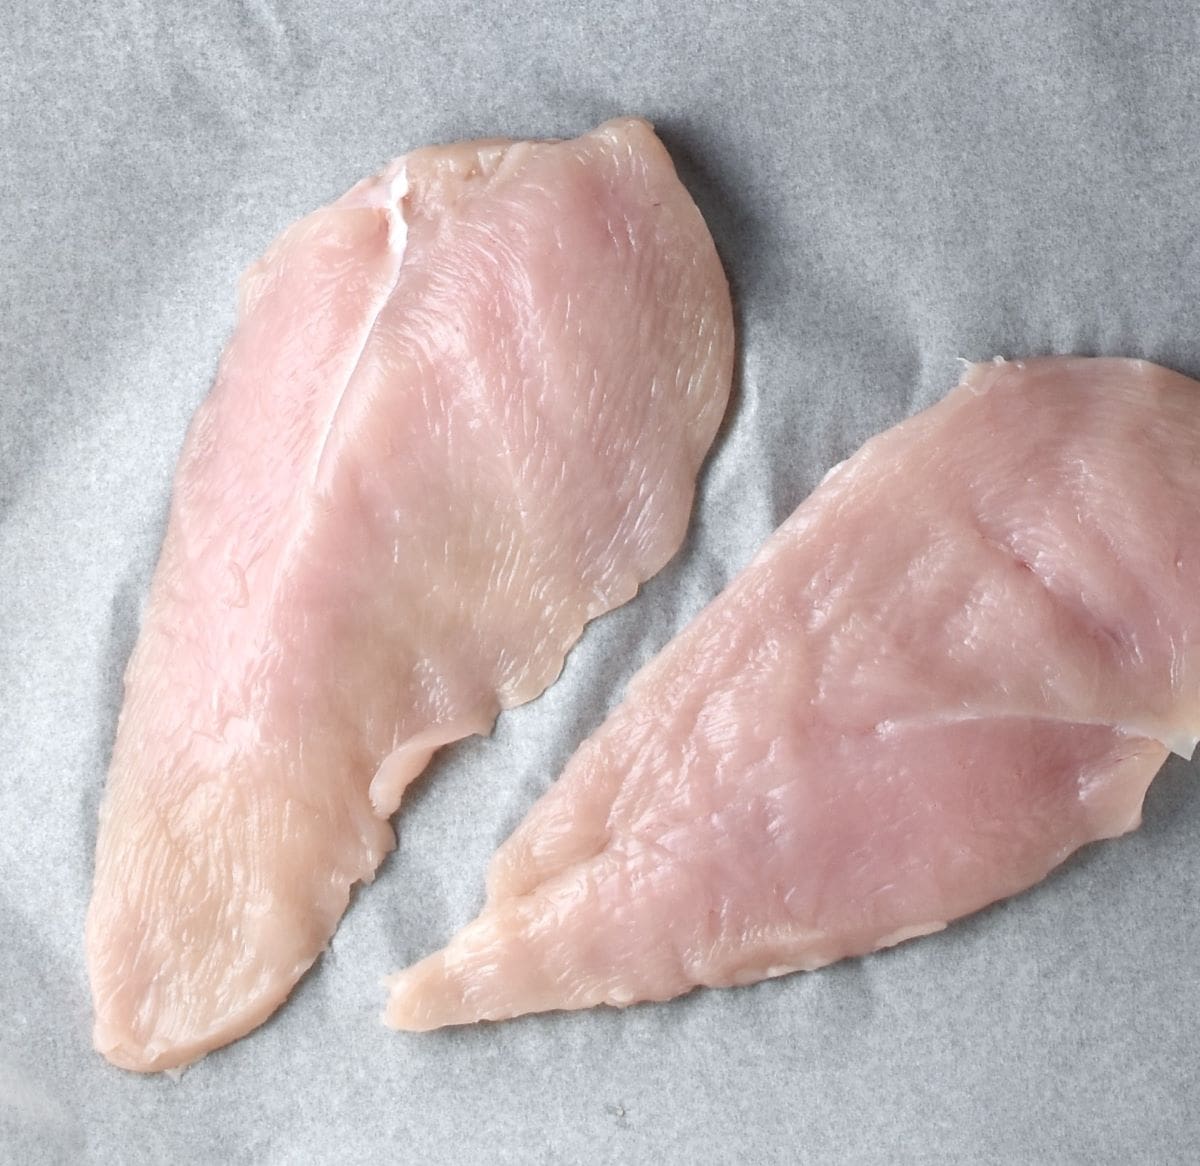 Top down view of 2 chicken breast halves on paper.